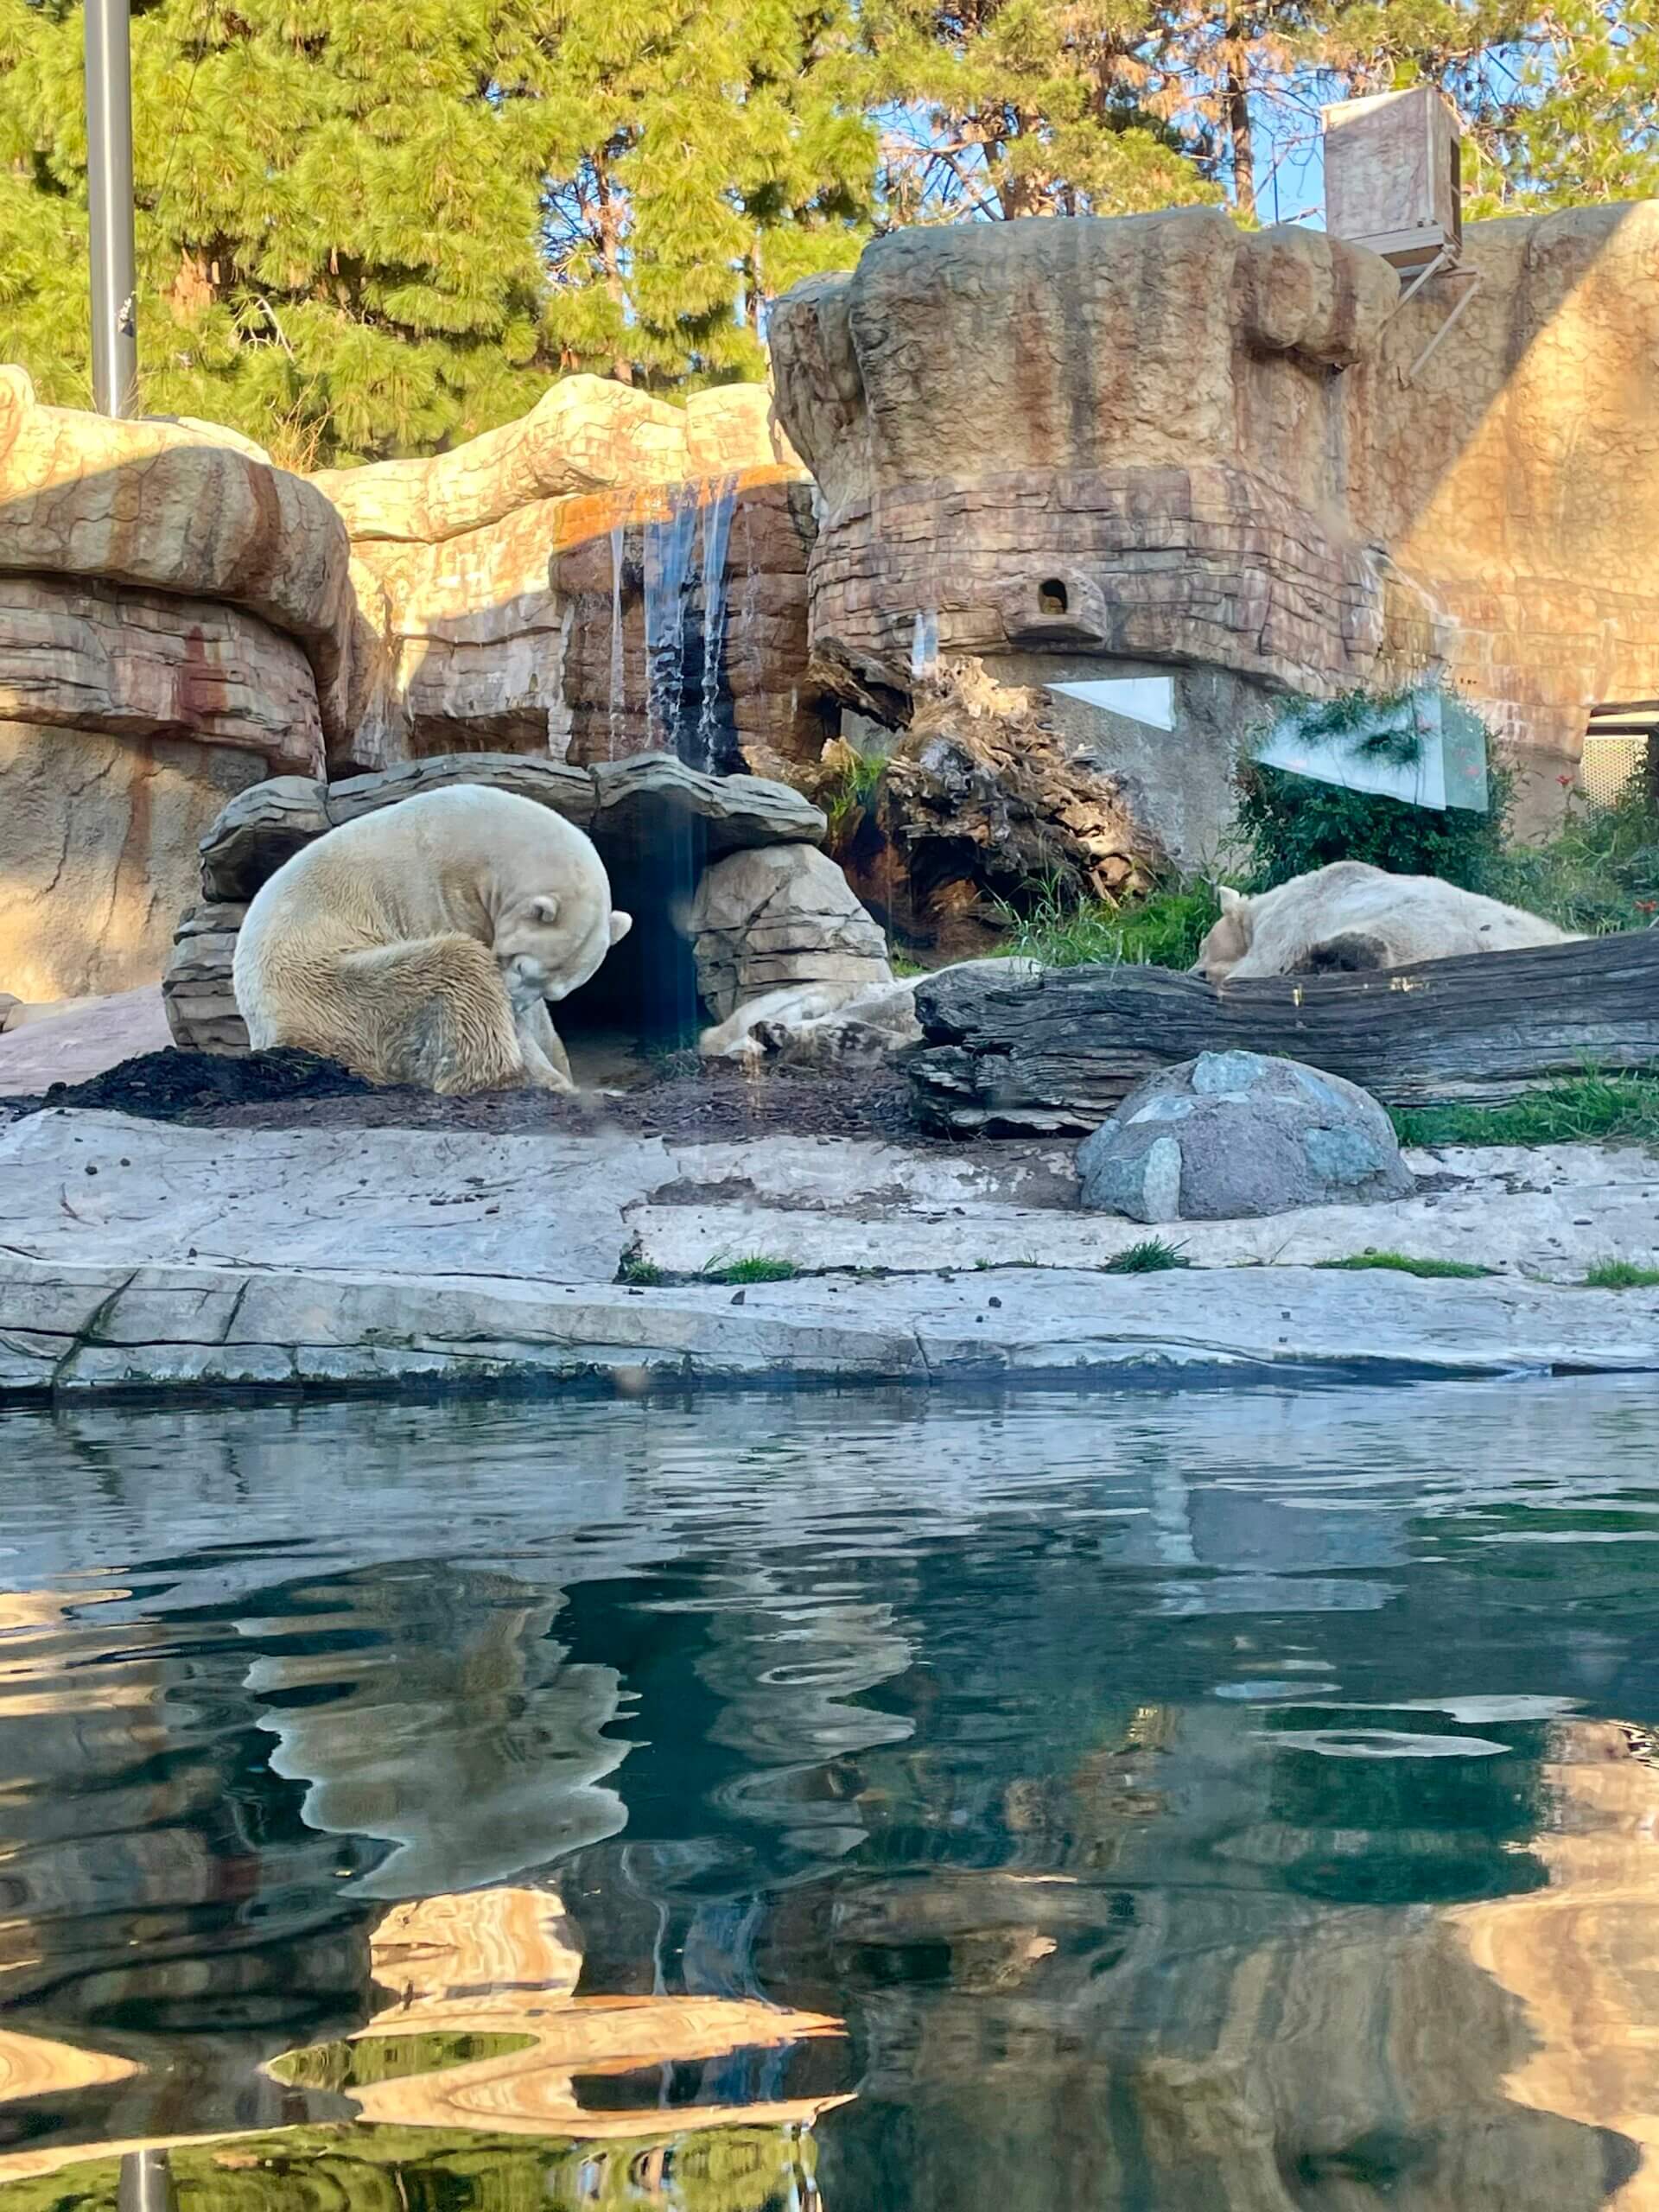 polar bears, zoo, San Diego zoo, are Zoos ethical?, are zoos as bad as seaworld?, are zoos okay?, mixed feelings about zoos, things to do in San Diego, layover in San Diego